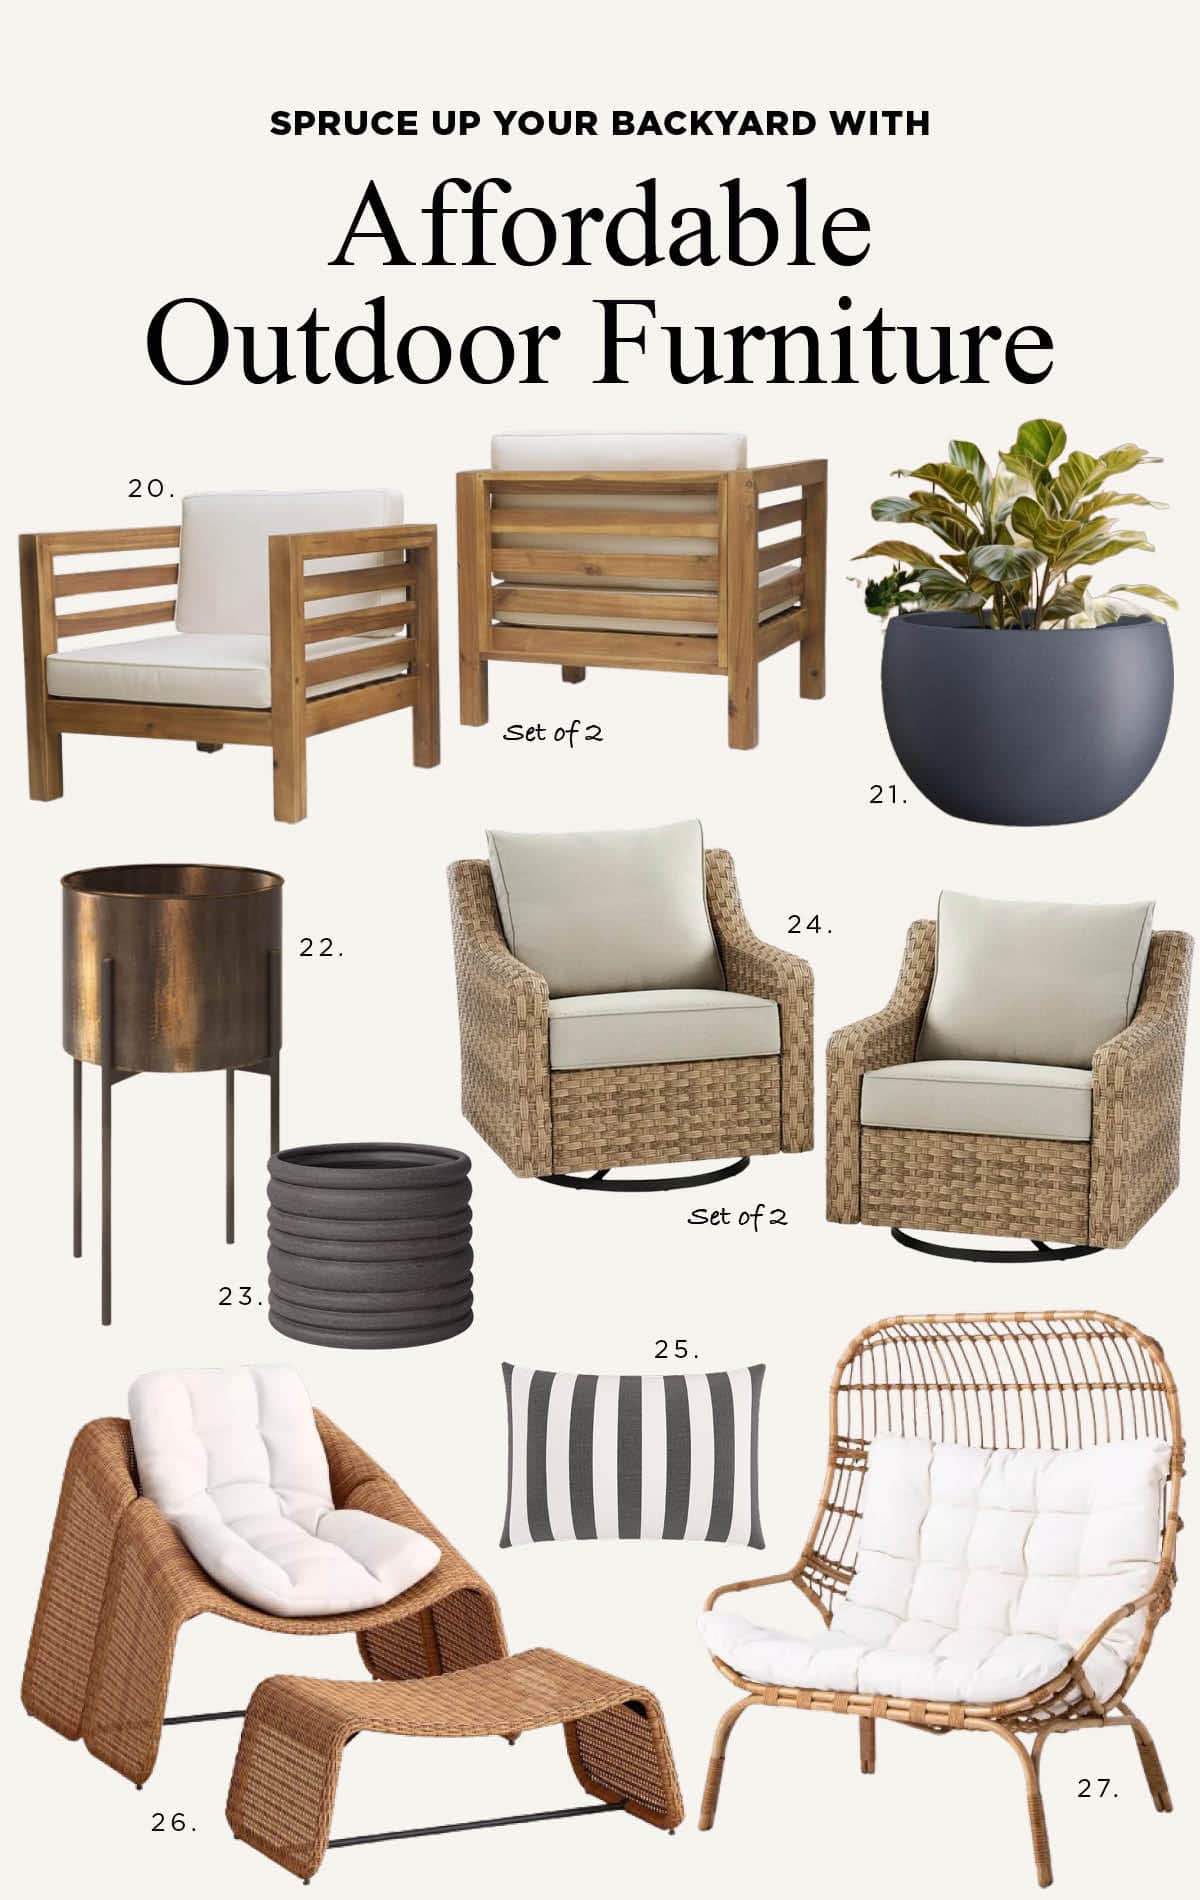 Find comfortable and affordable outdoor rocking chairs that swivel and glide, the outdoor egg chair I own and love, throw pillows, and planters, fire pits, and more.